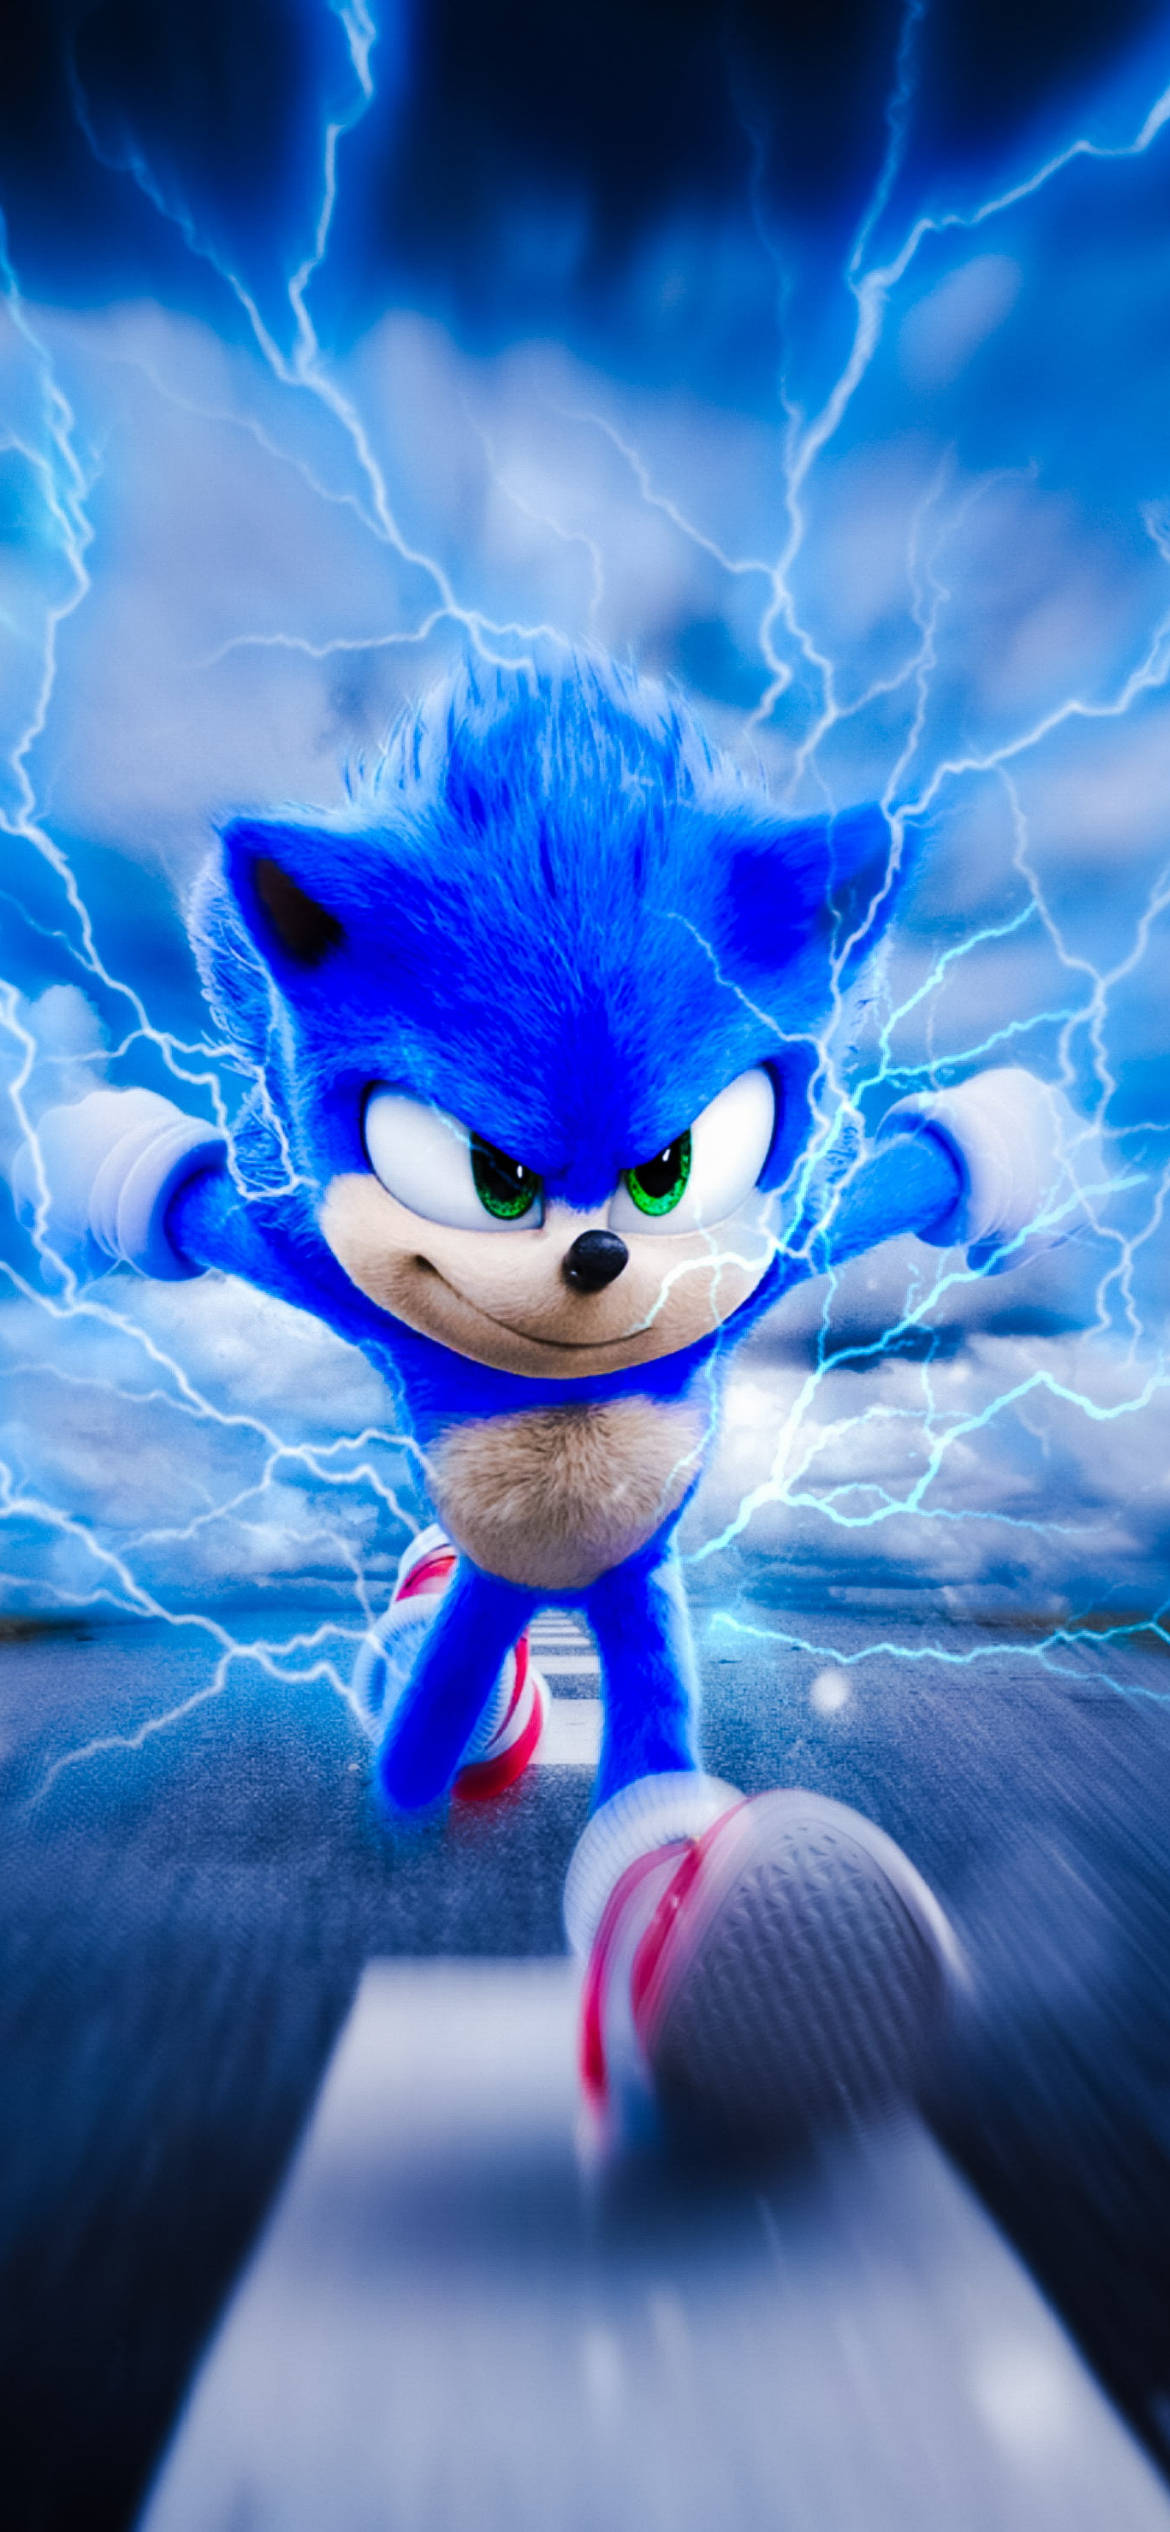 Sonic The Hedgehog hastighed iPhone Tapet Wallpaper